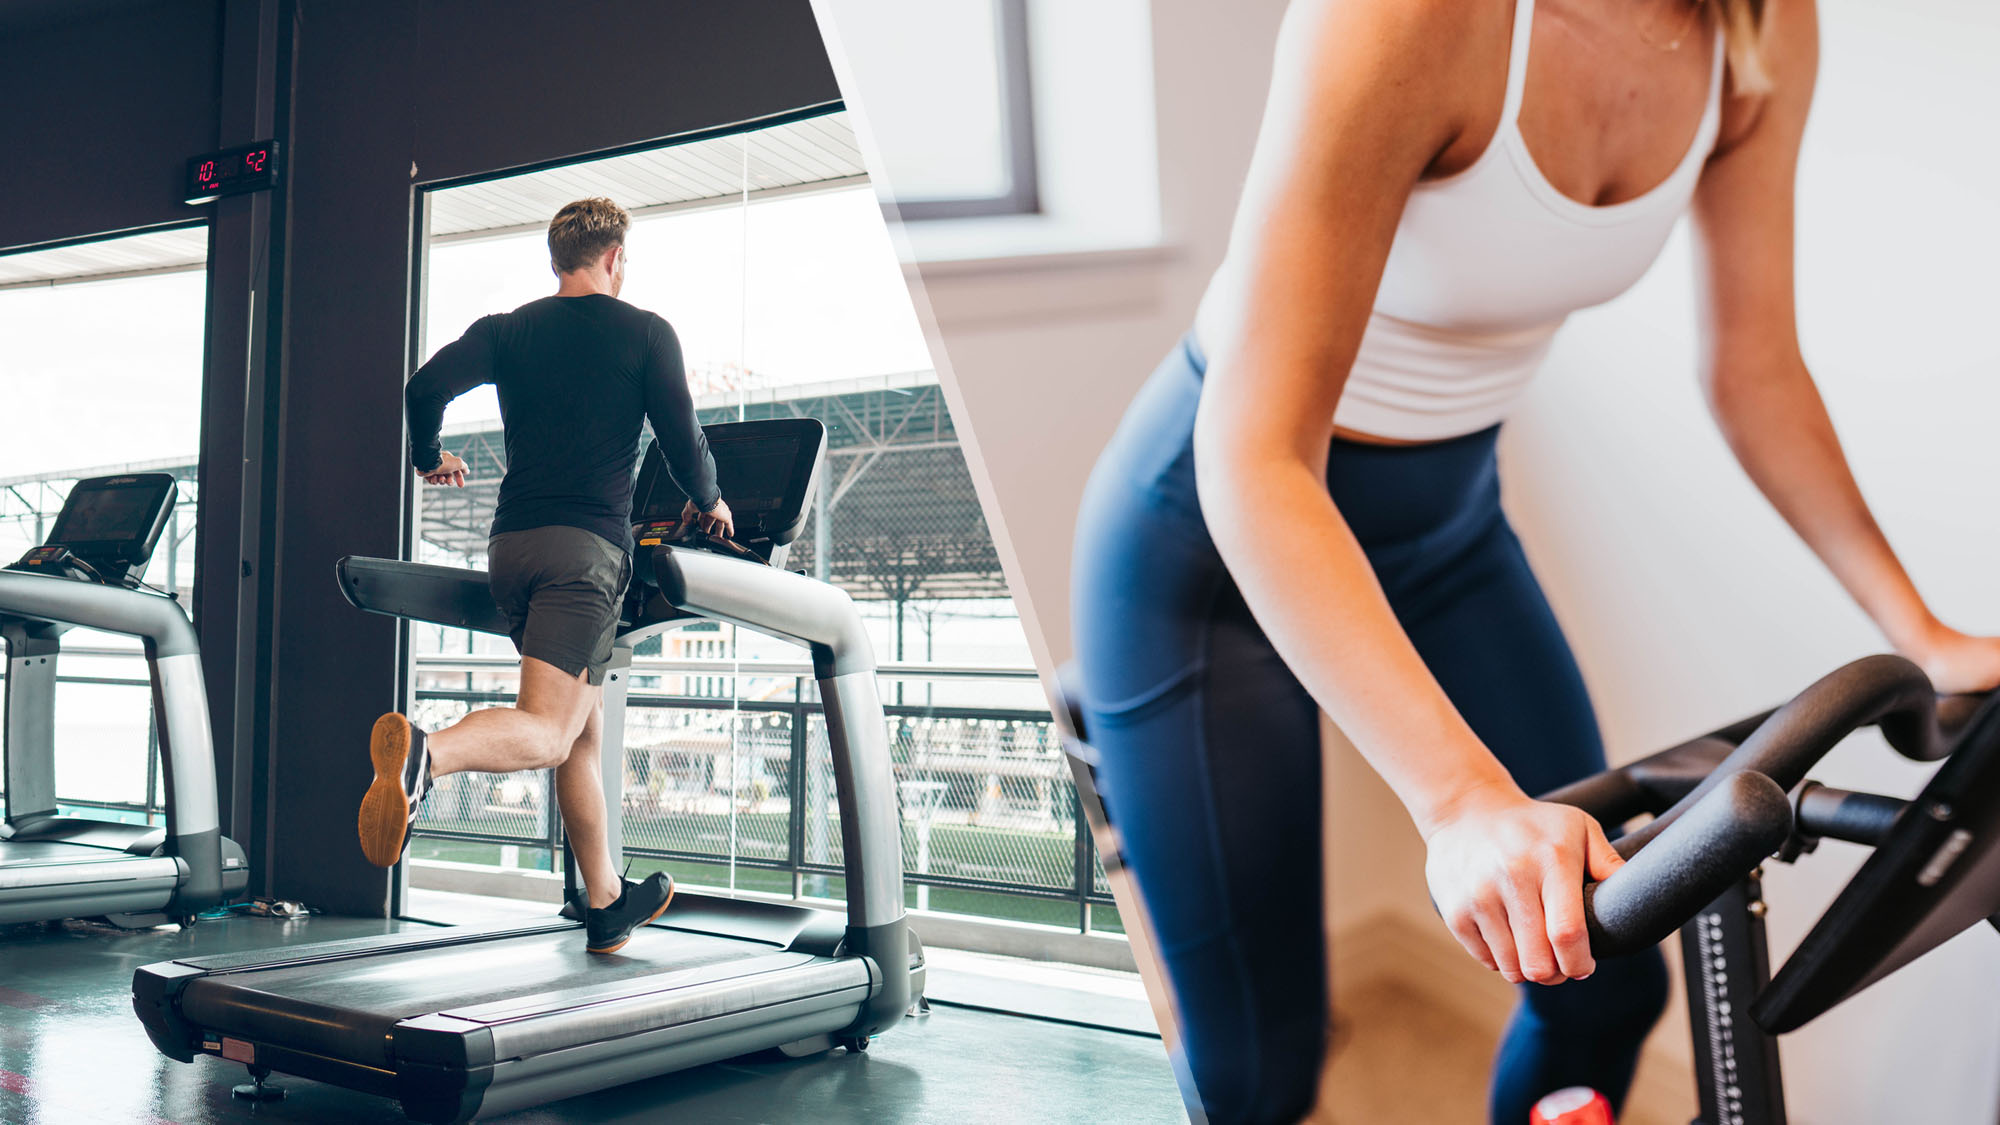 Treadmill vs exercise bike — which is a better workout?